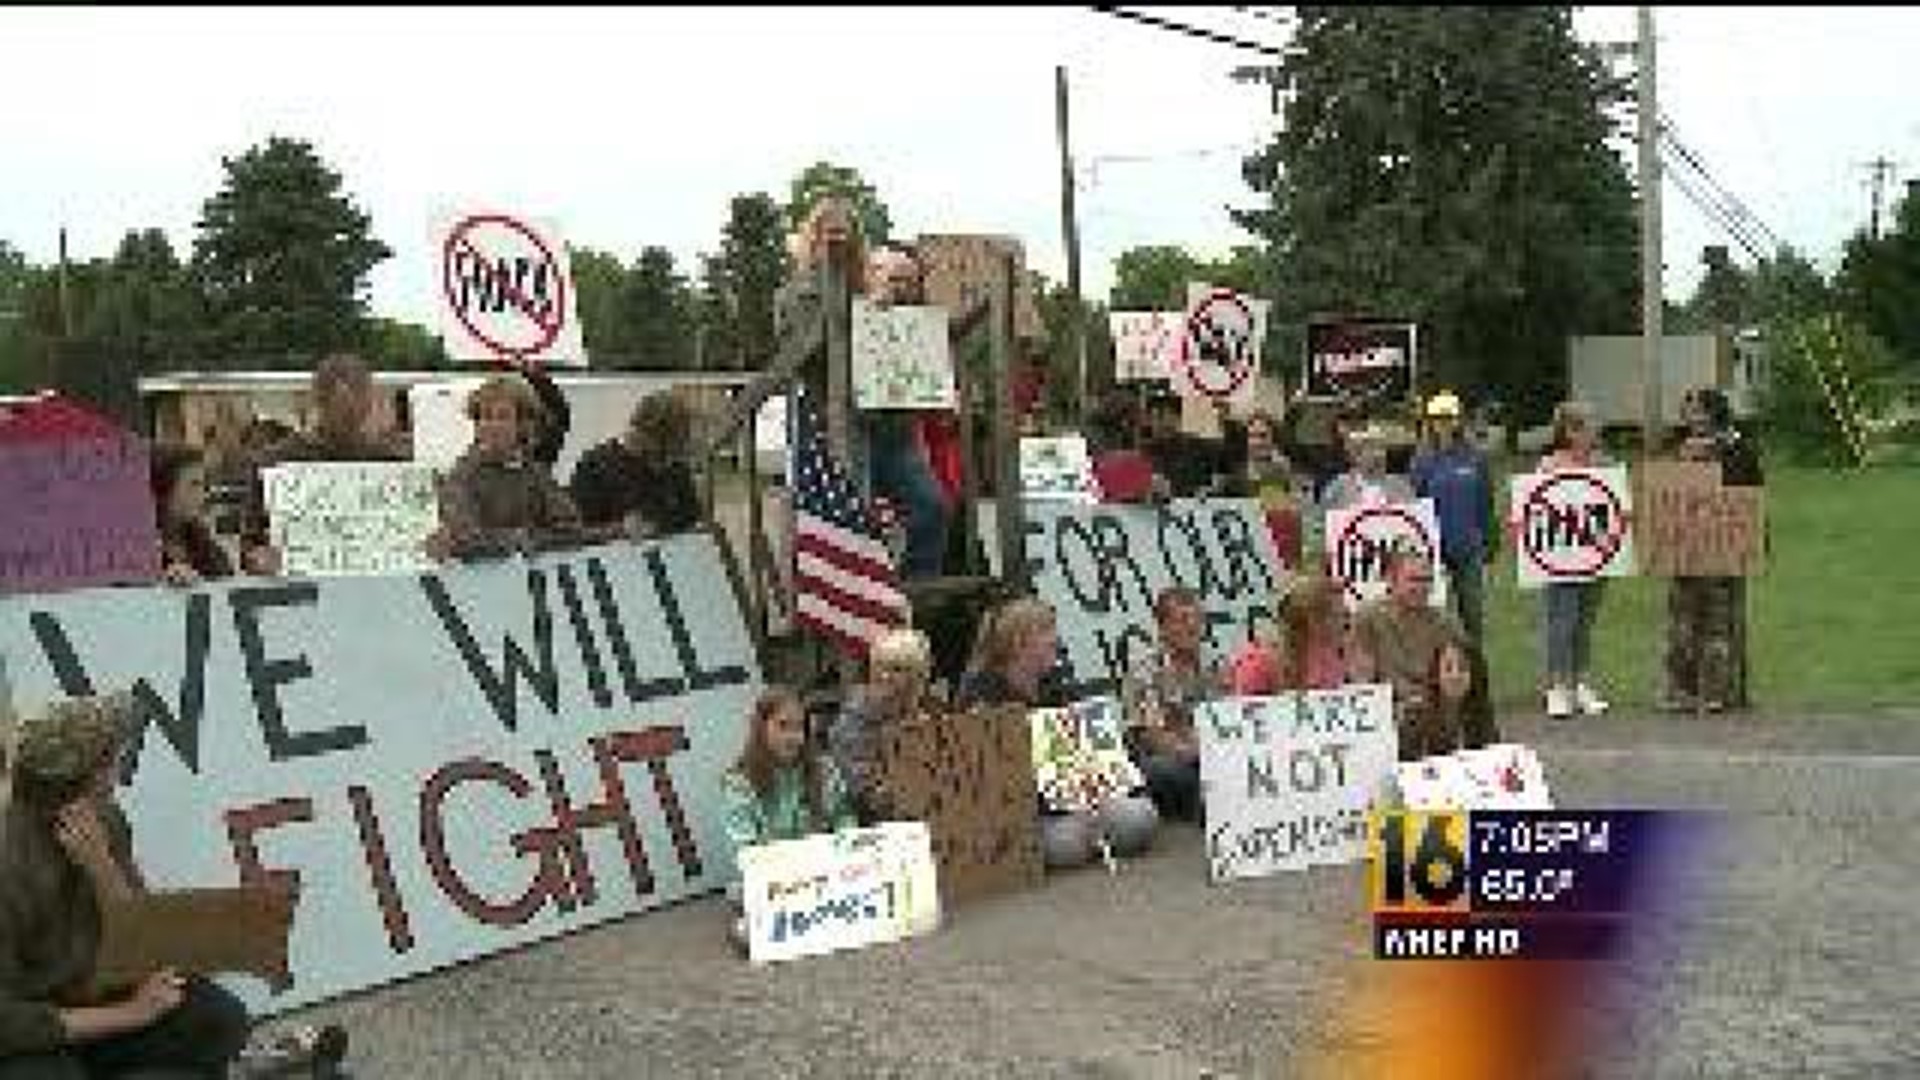 Activists Stand with Mobile Home Park Residents